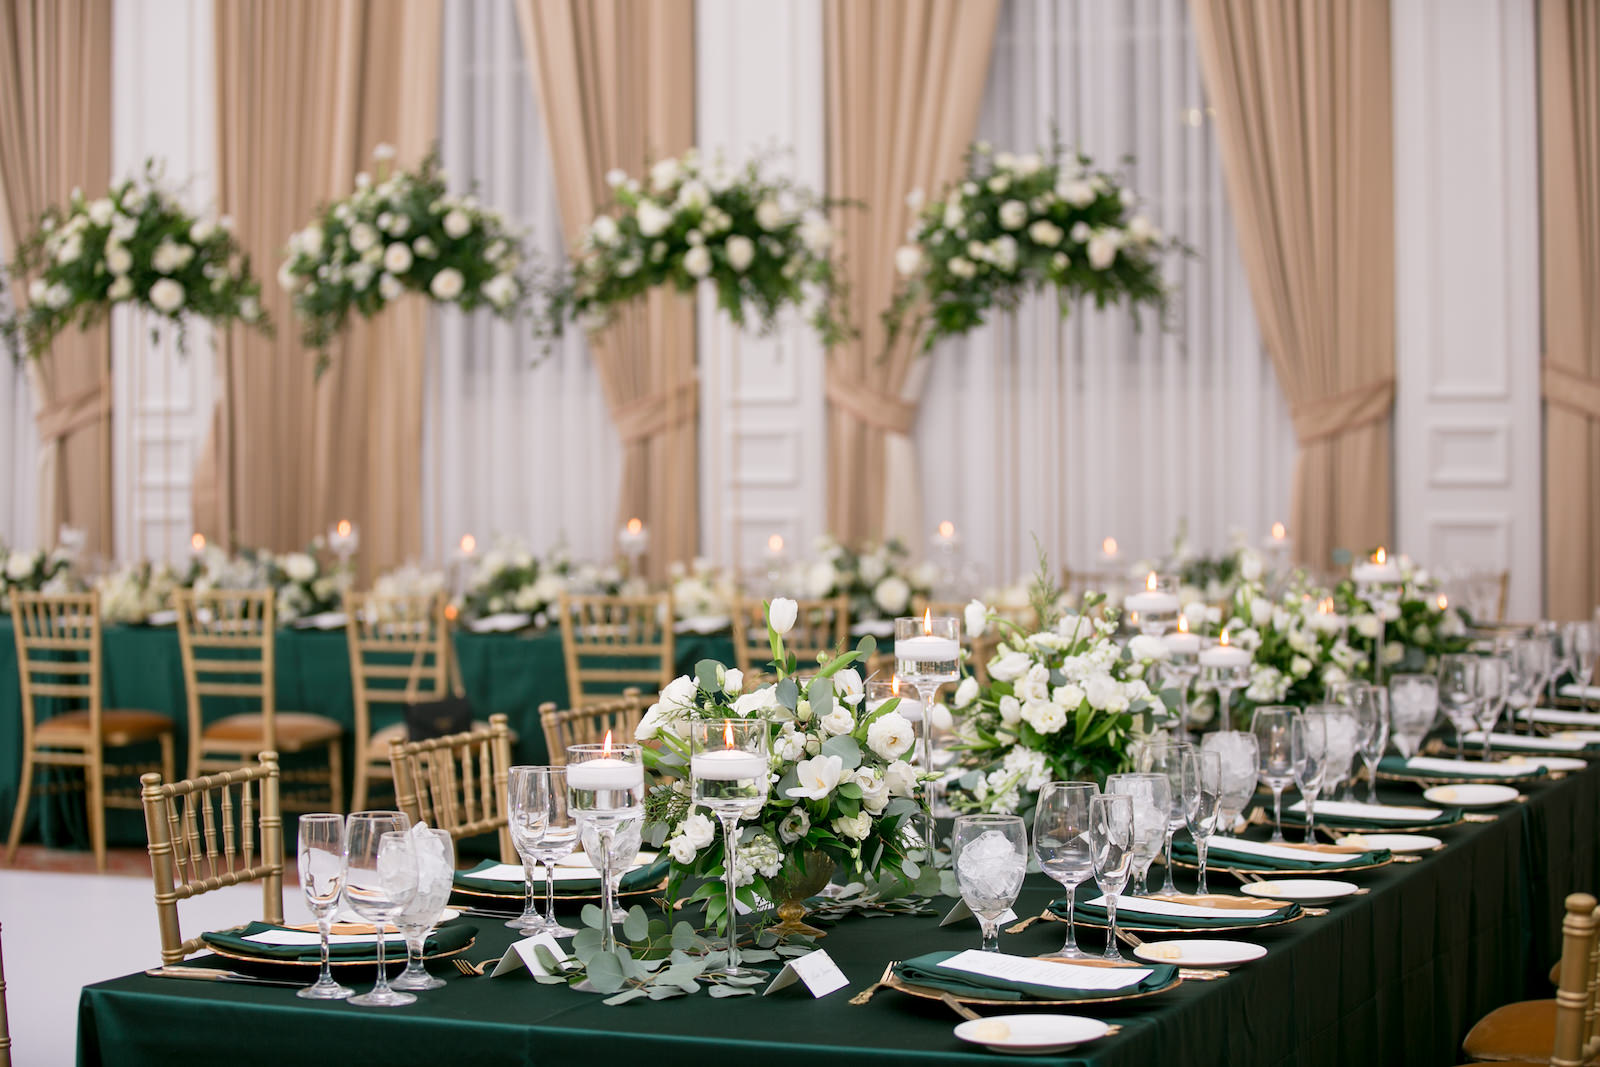 Green and Gold Christmas Wedding Decor, Long and Round Tables with Emerald Green Table Linens, Gold Chiavari Chairs, Gold Chargers, White and Greenery Low and Tall Floral Centerpieces, Gold Monogram on Dance Floor | Tampa Bay Wedding Photographer Carrie Wildes Photography | Wedding Rentals Kate Ryan Event Rentals | Over the Top Rental Linens | A Chair Affair Event Rentals